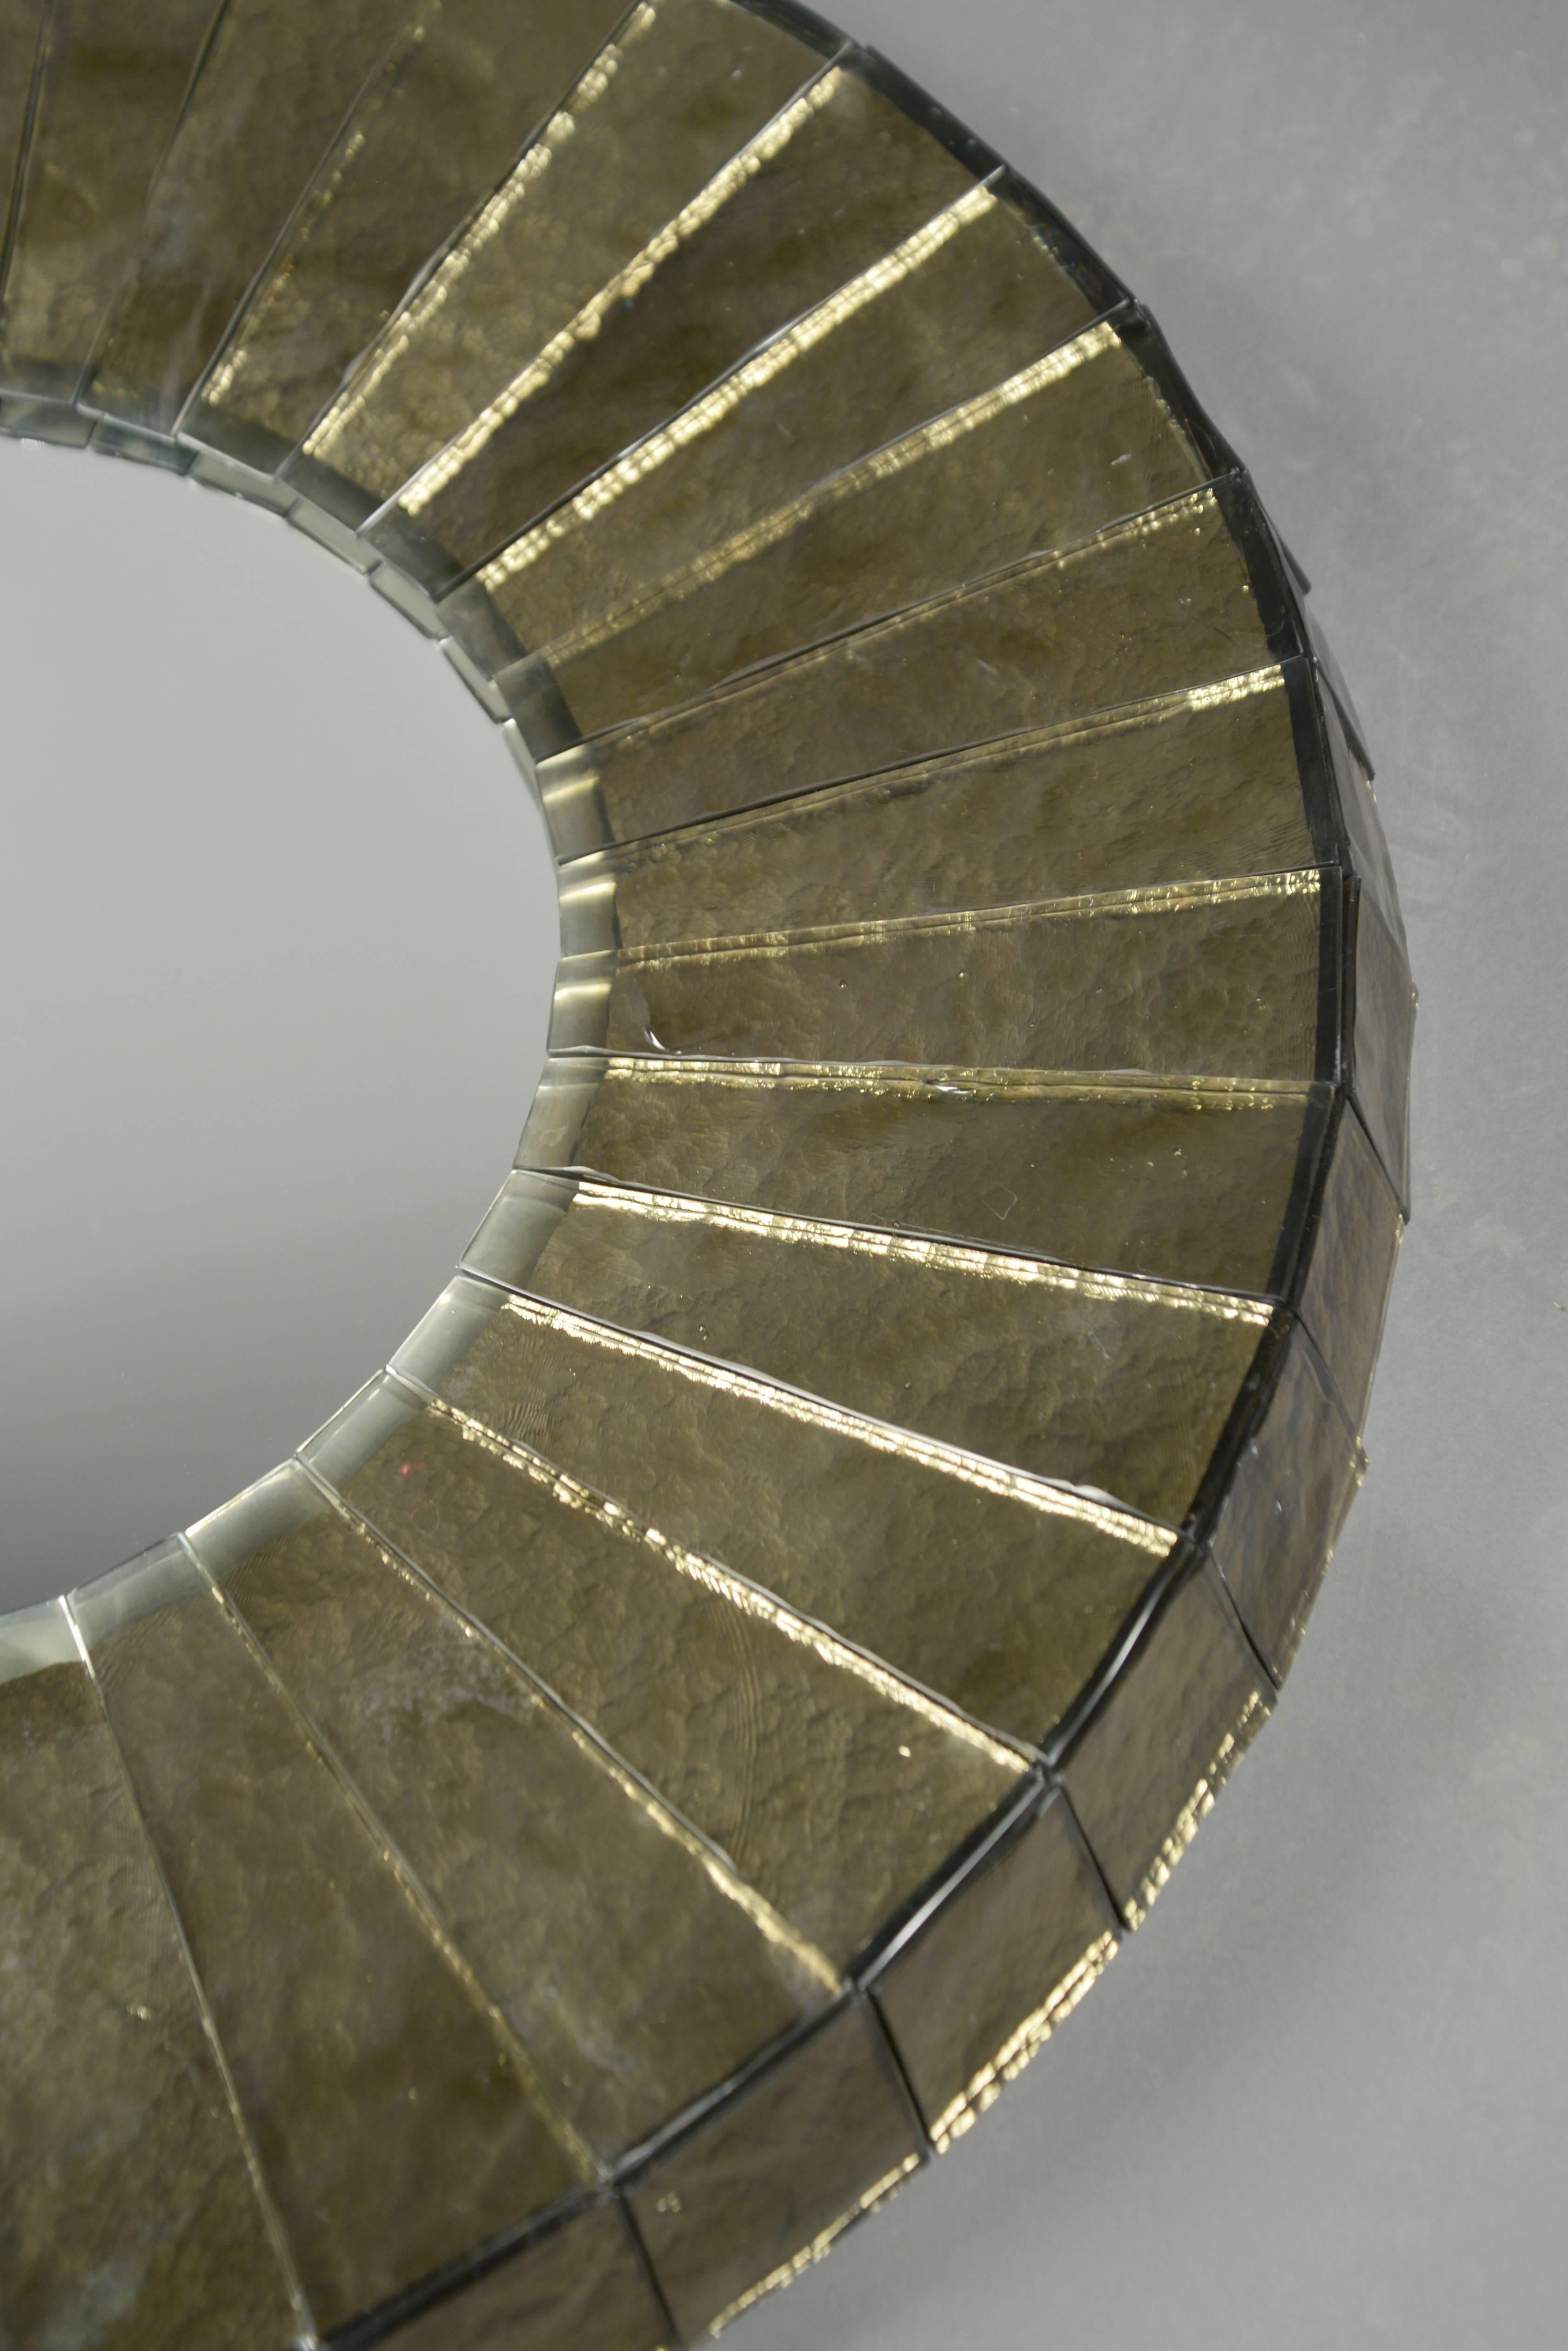 Hand-hewn wedges of thick mirrored gray glass, abutting similarly chiseled sides, encompassing the round mirrored glass plate. Model “Leucos”. The mirror plate itself is 17